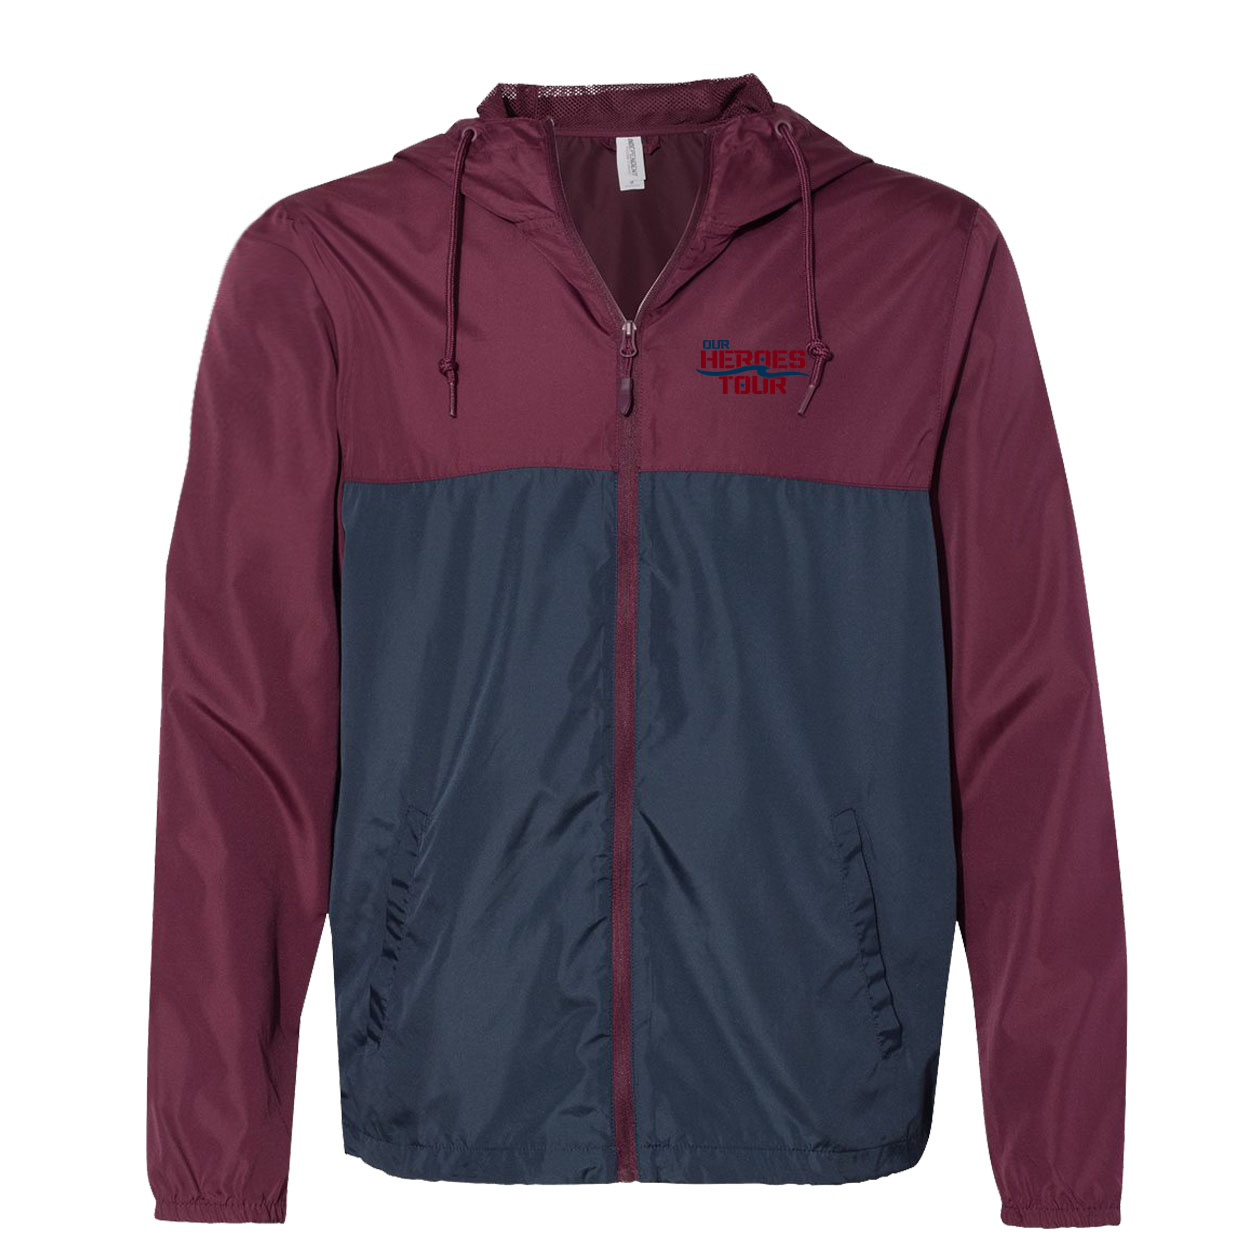 Our Heroes Tour Night Out Lightweight Windbreaker Maroon/Navy